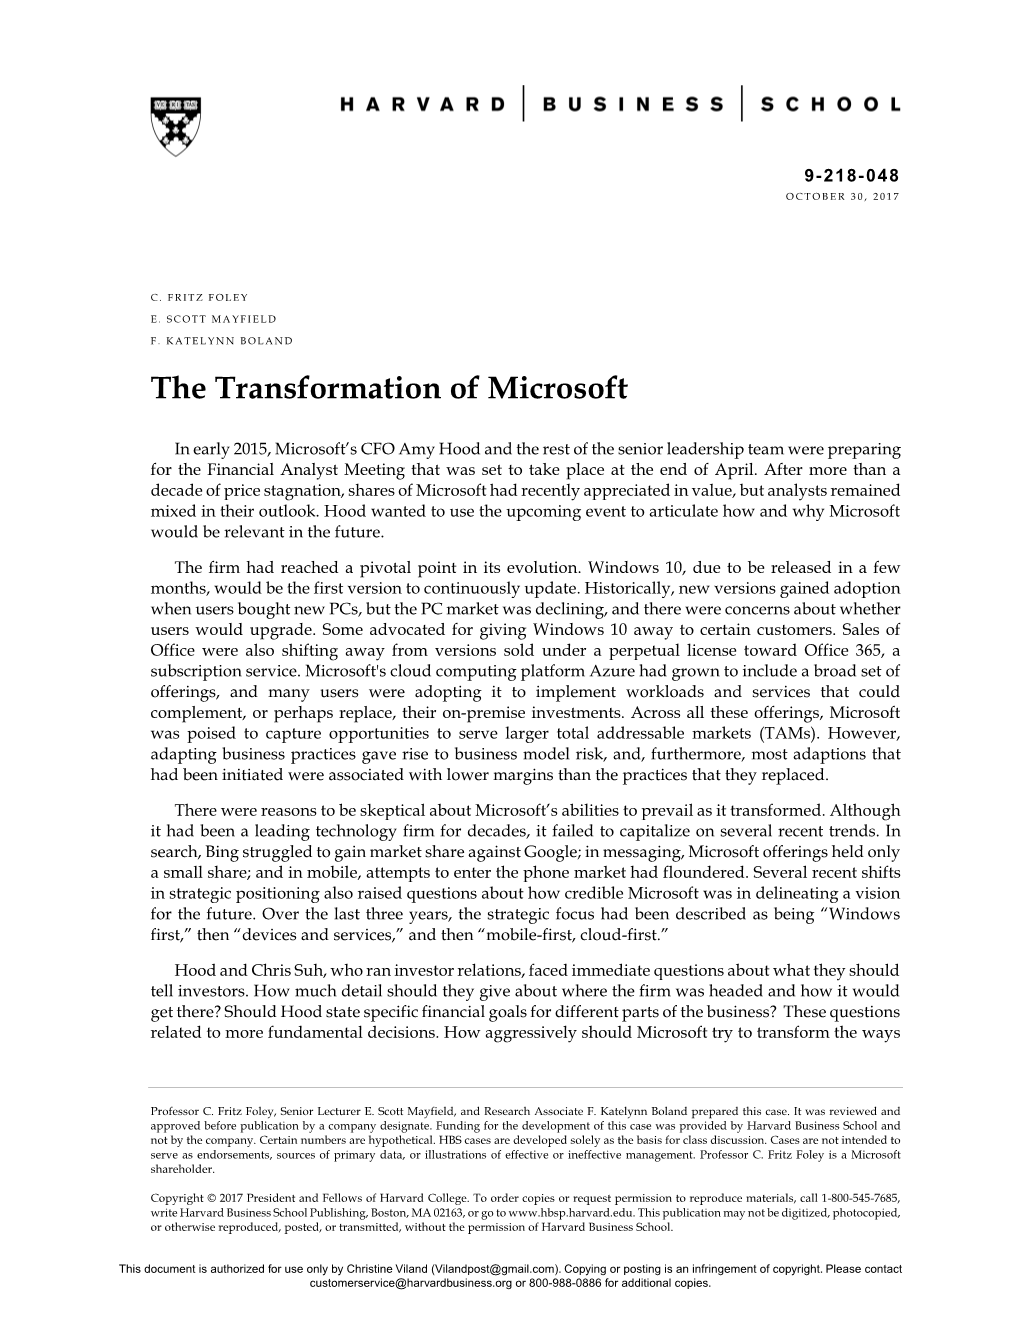 the transformation of microsoft case study